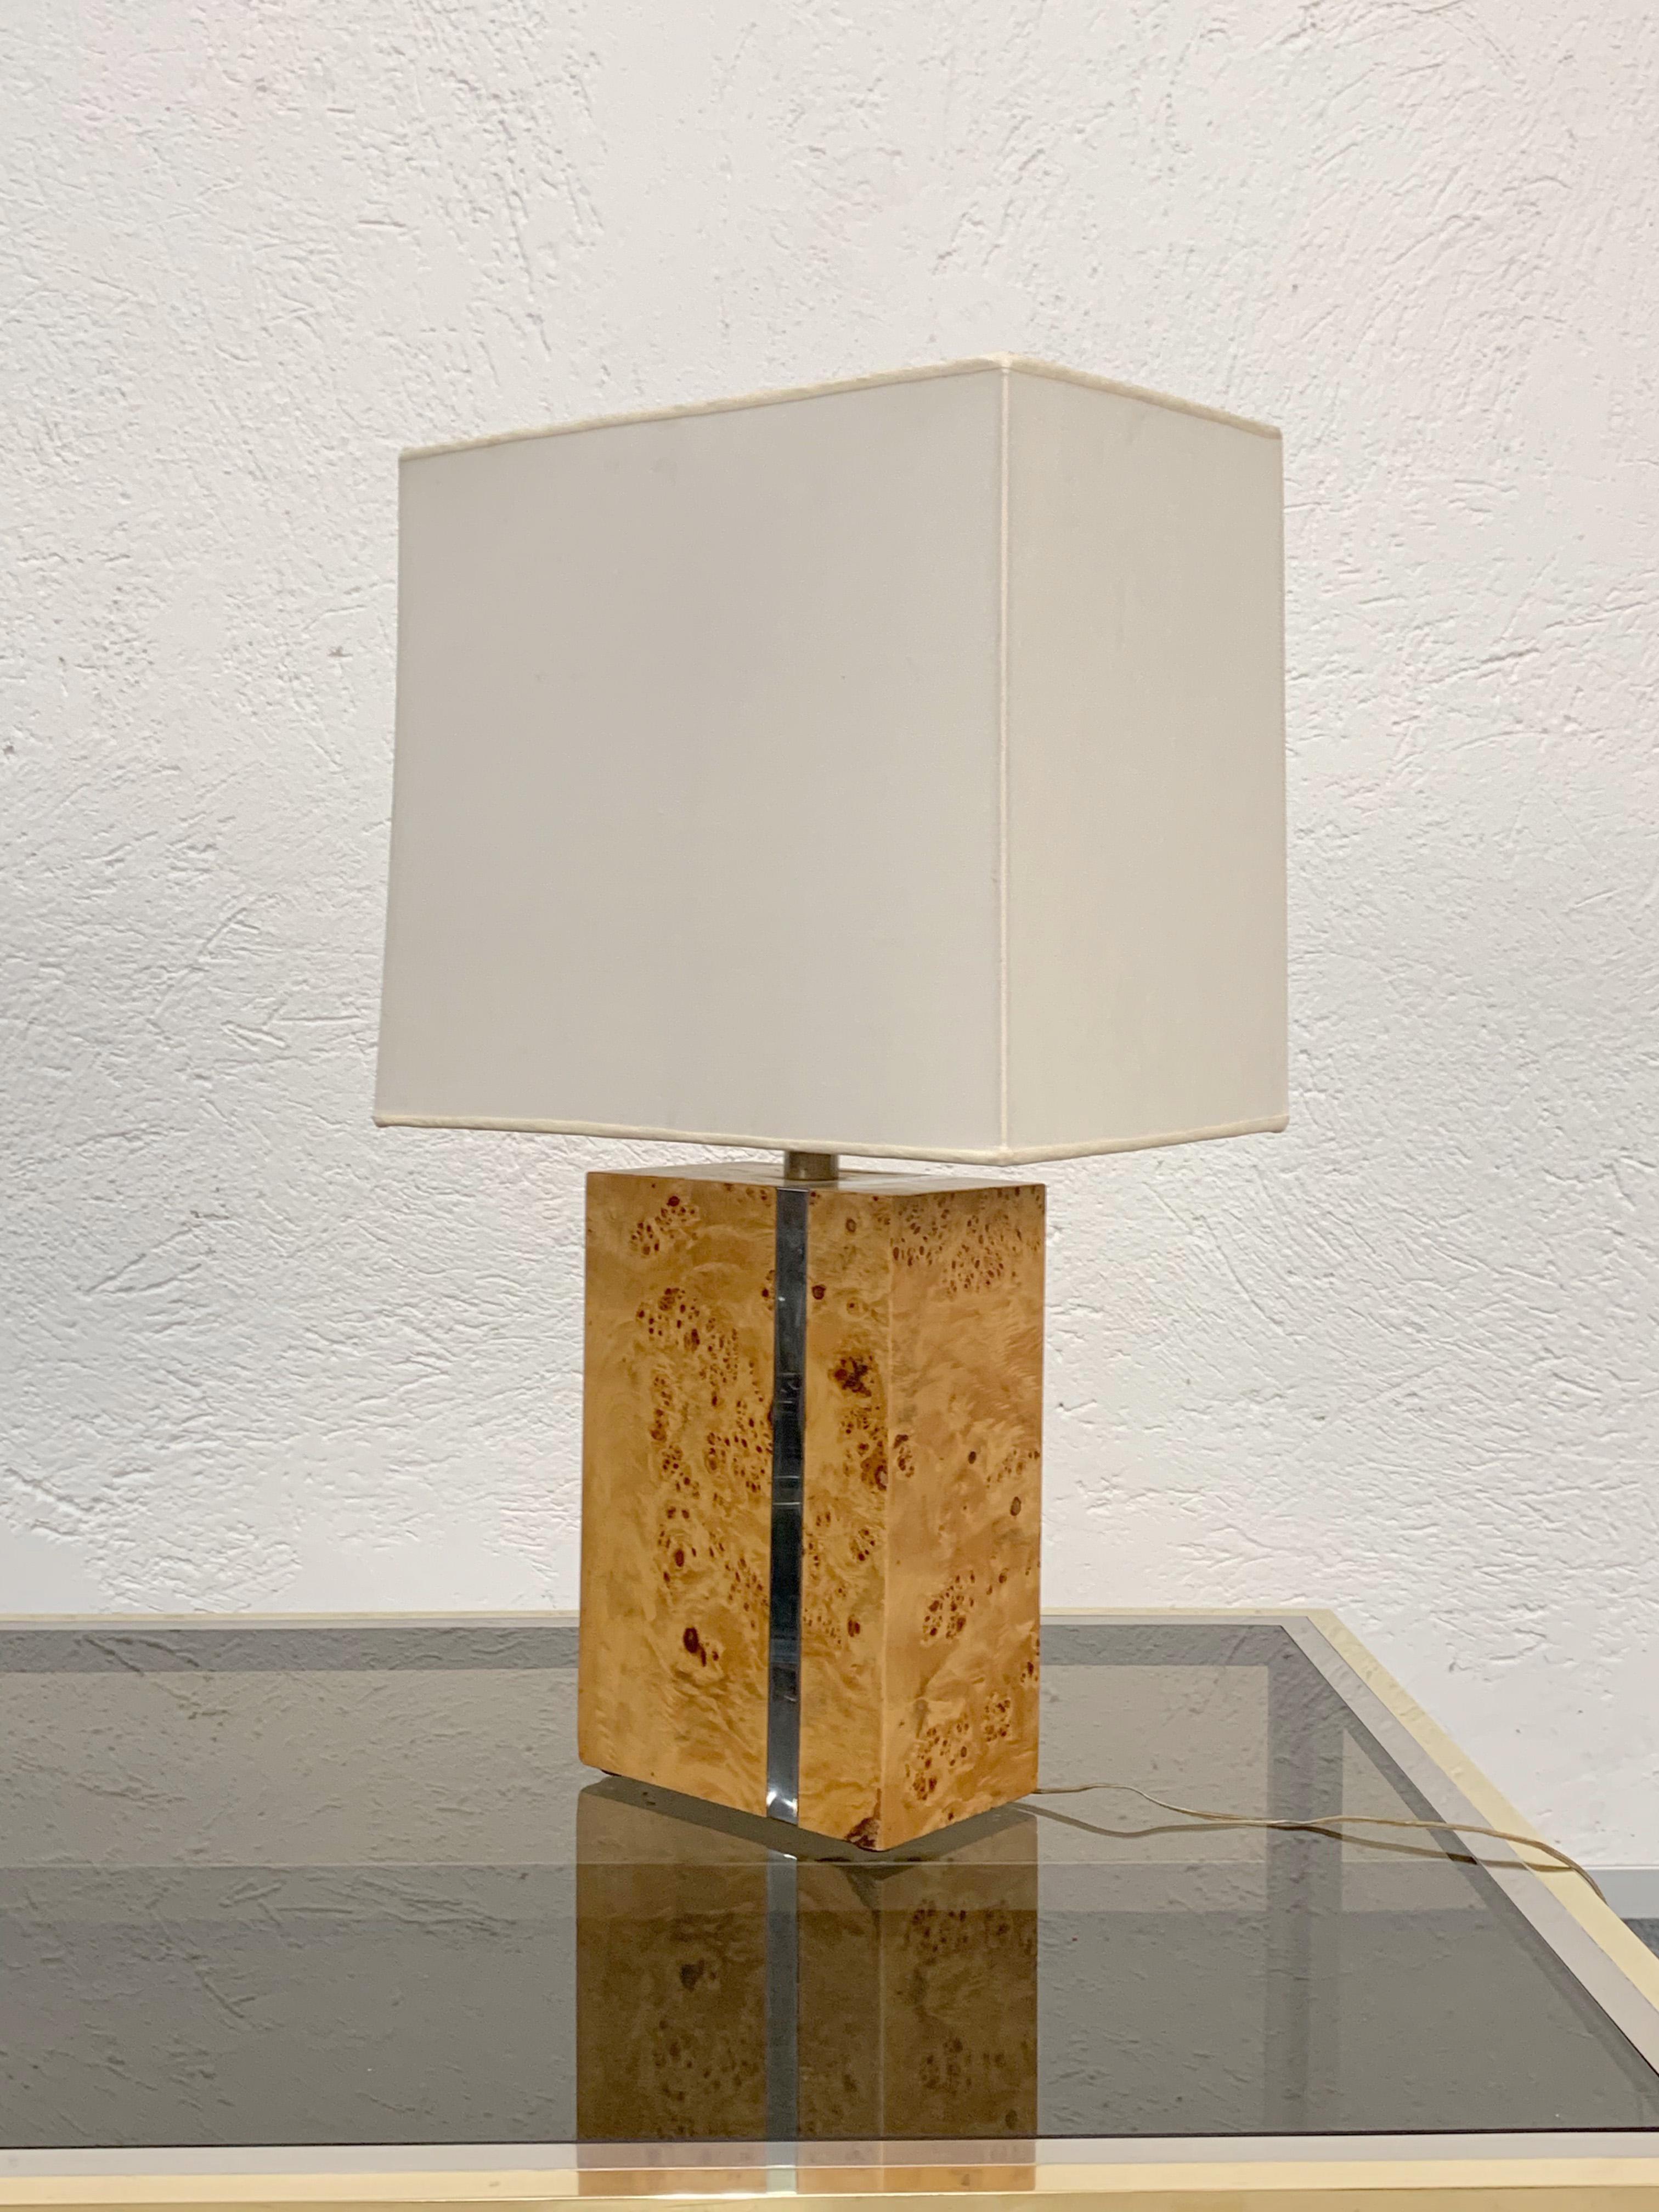 Italian table lamp by Tommaso Barbi with original label. Produced in Italy in the 1970s.

This splendid lamp is made of poplar briar and mounts two bulbs with E 27 attachment.

The base measures: 20 x 12 x 30 cm. of height.

The total size